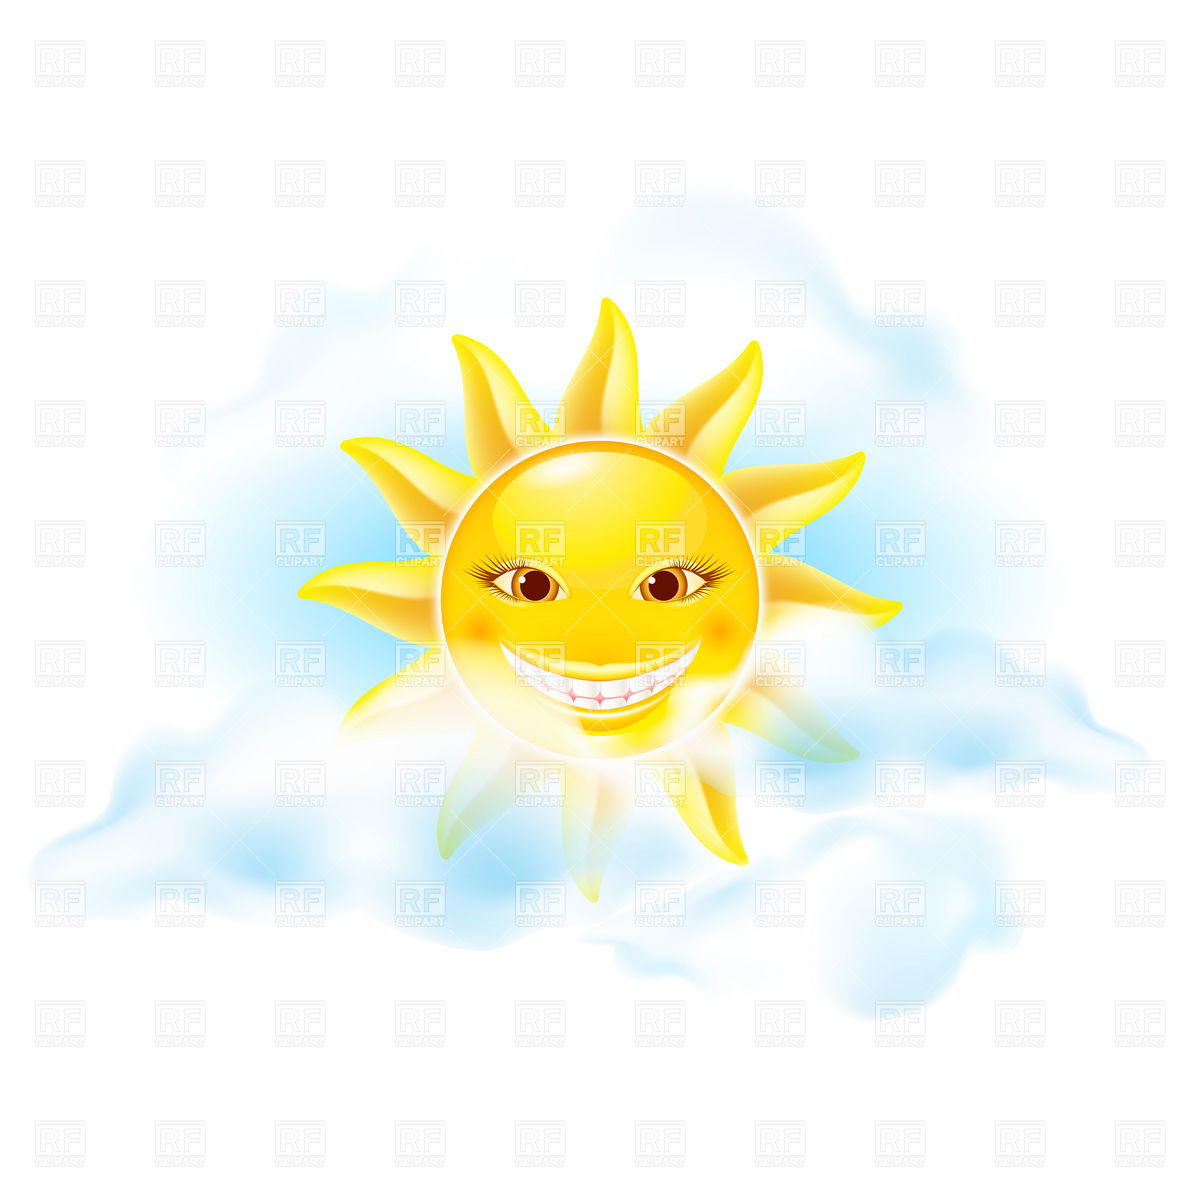 Smiley Sun With Funny Eyelashes Travel Download Royalty Free Vector